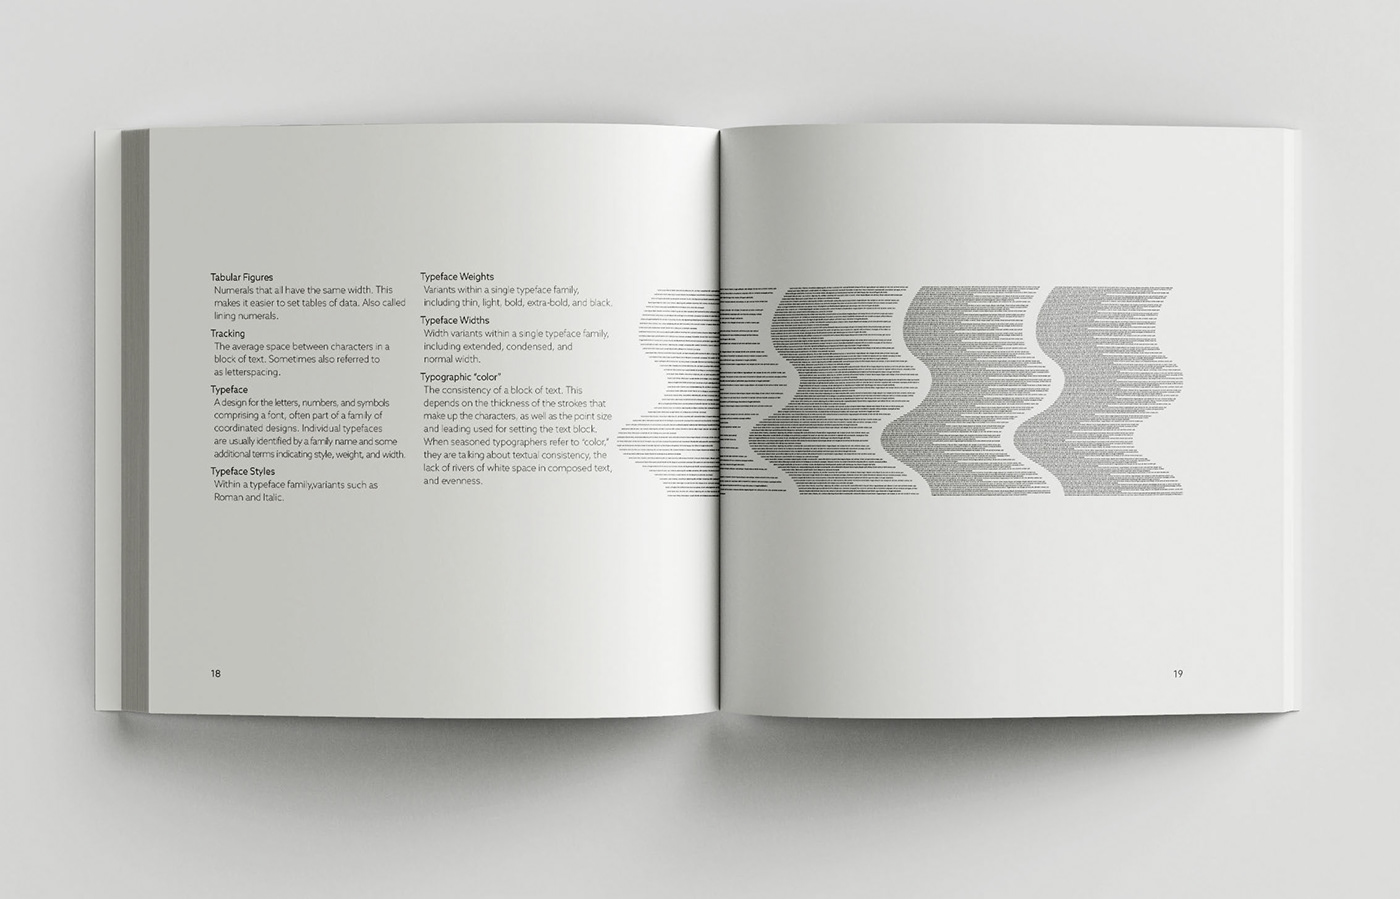 A spread from type book design visually illustrating Typographic colour.